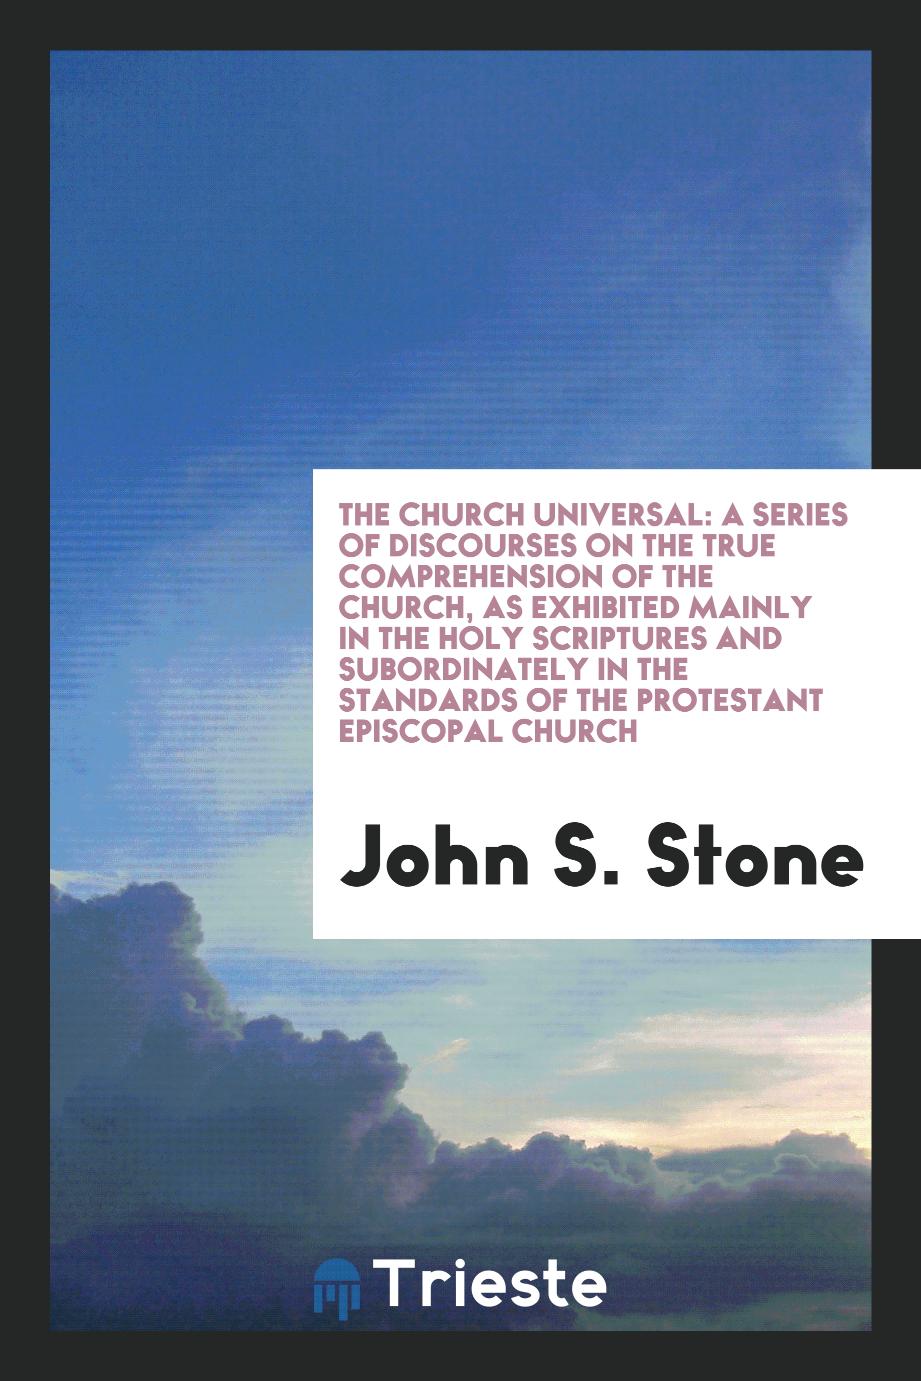 The church universal: a series of discourses on the true comprehension of the church, as exhibited mainly in the Holy Scriptures and subordinately in the standards of the Protestant Episcopal church